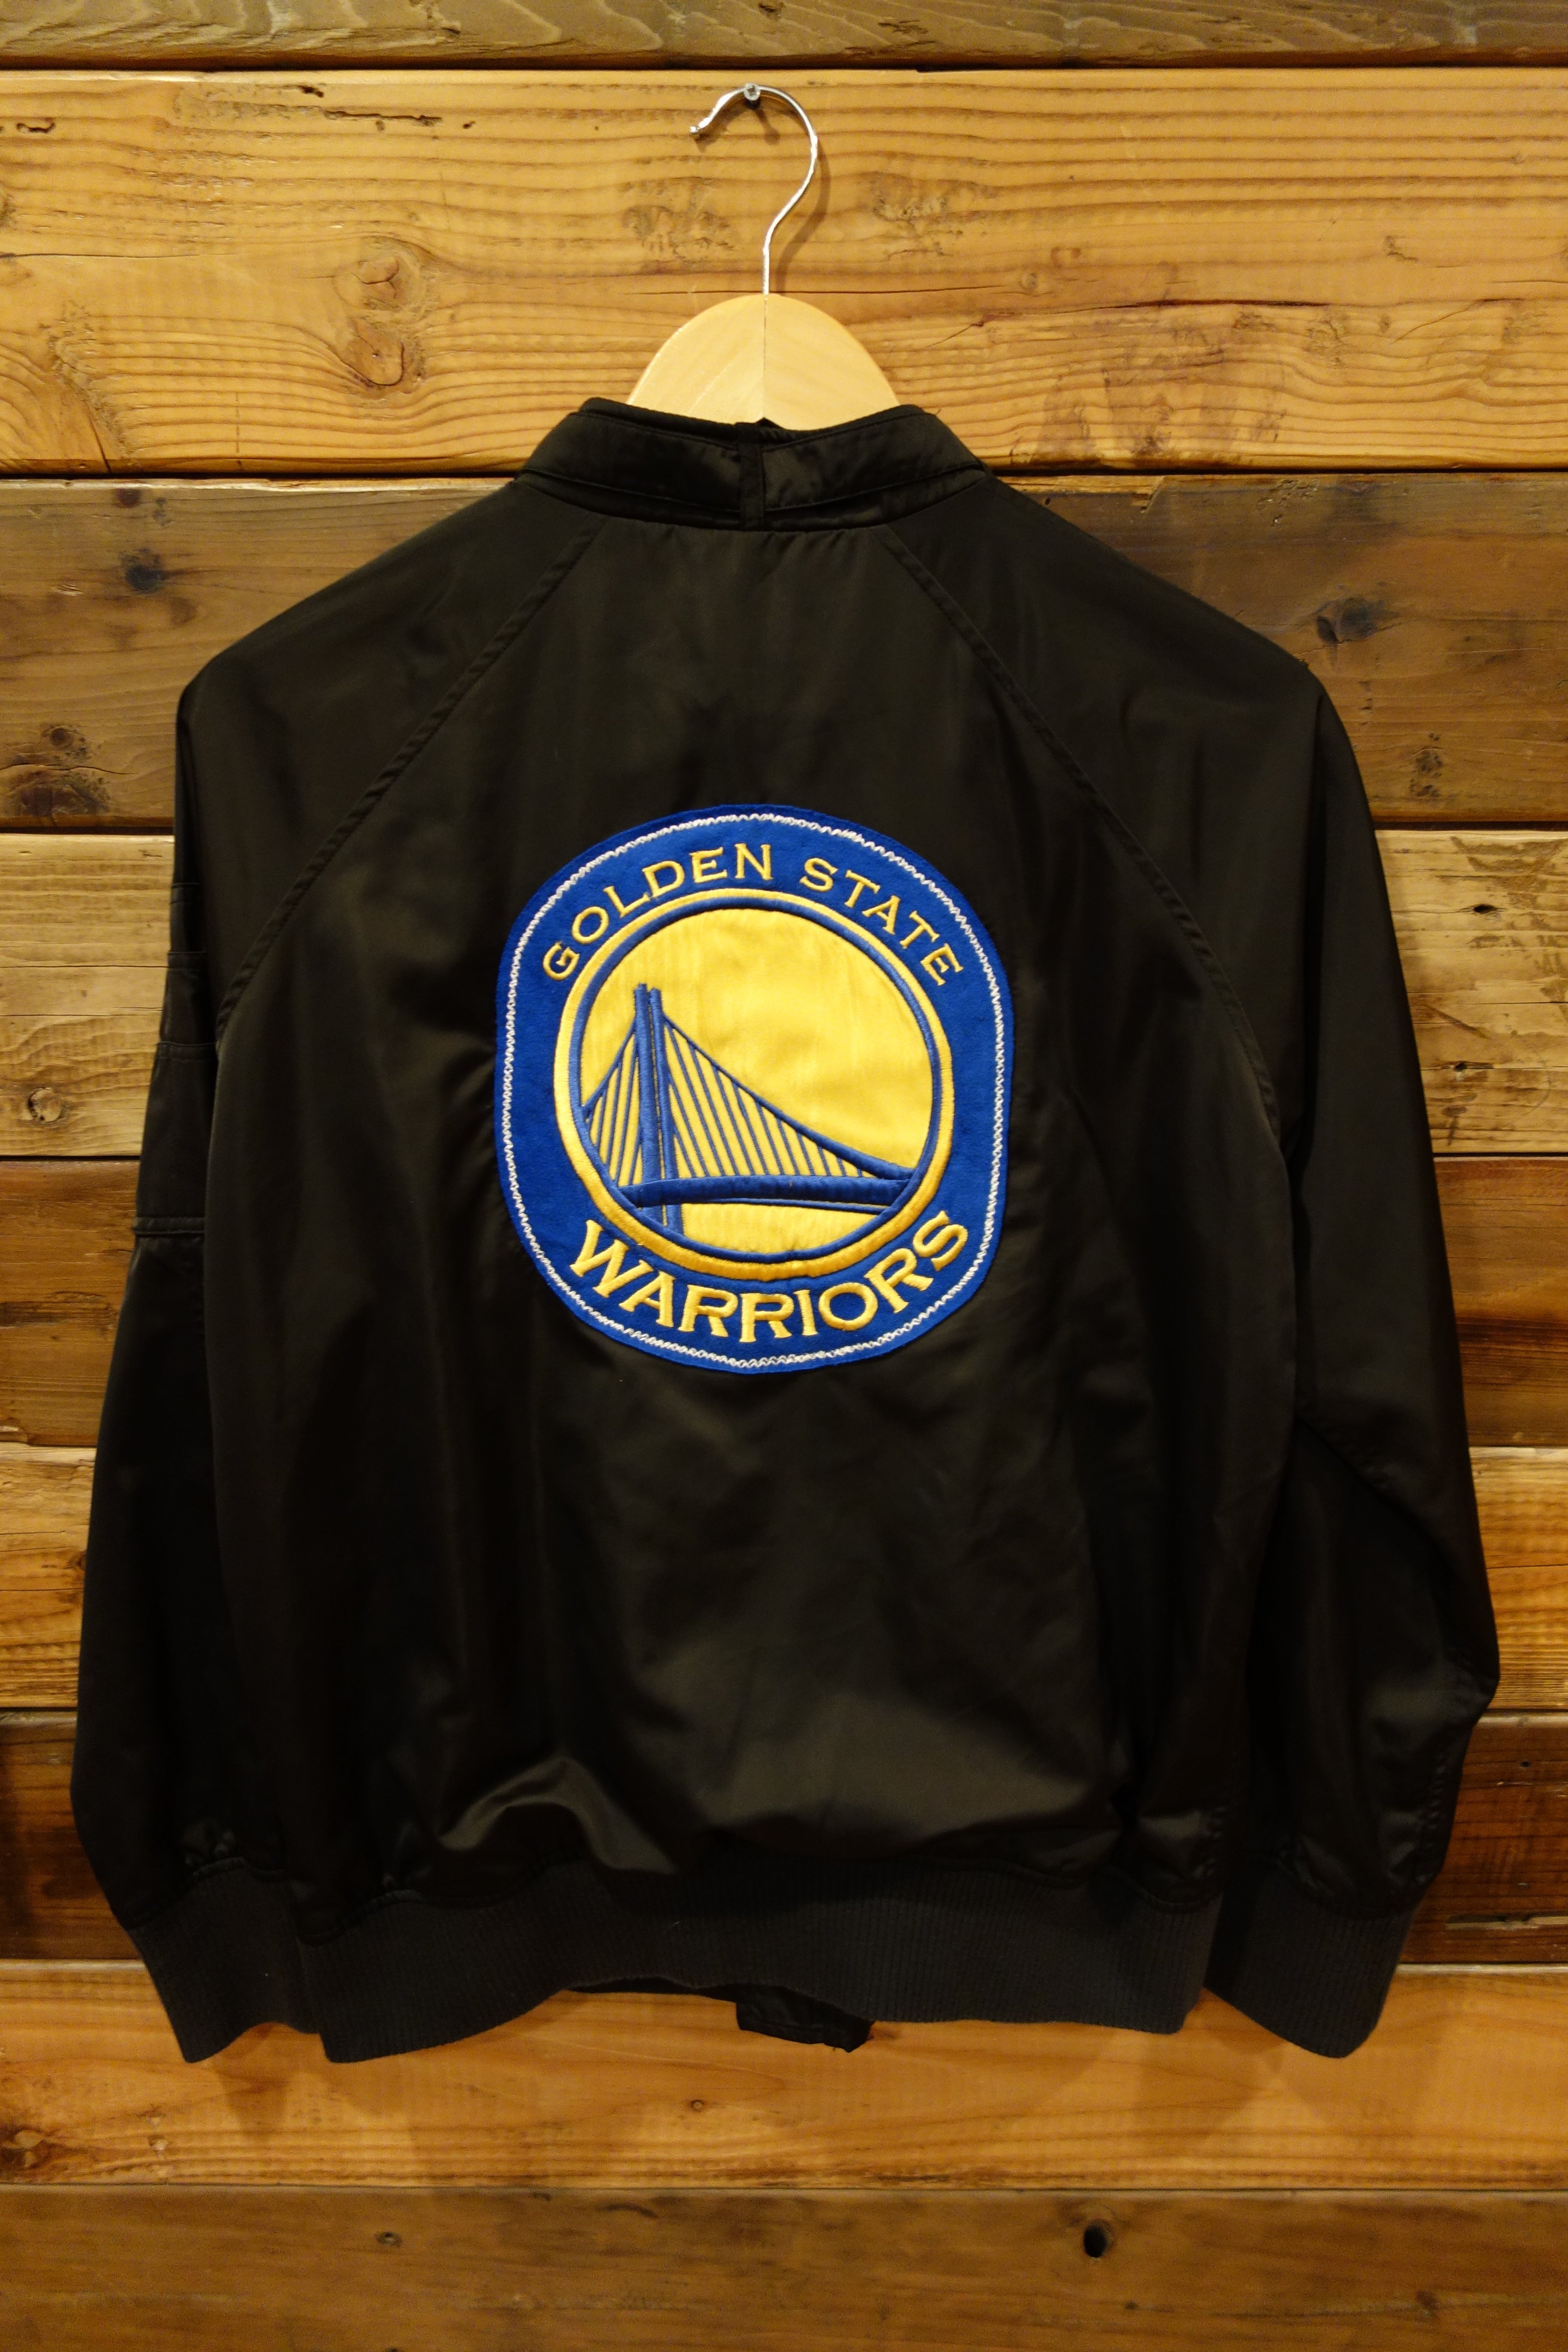 Member's Only, one of a kind bomber jacket, NBA, Golden State Warriors, Golden State Warriors Classic Flannel Jacket